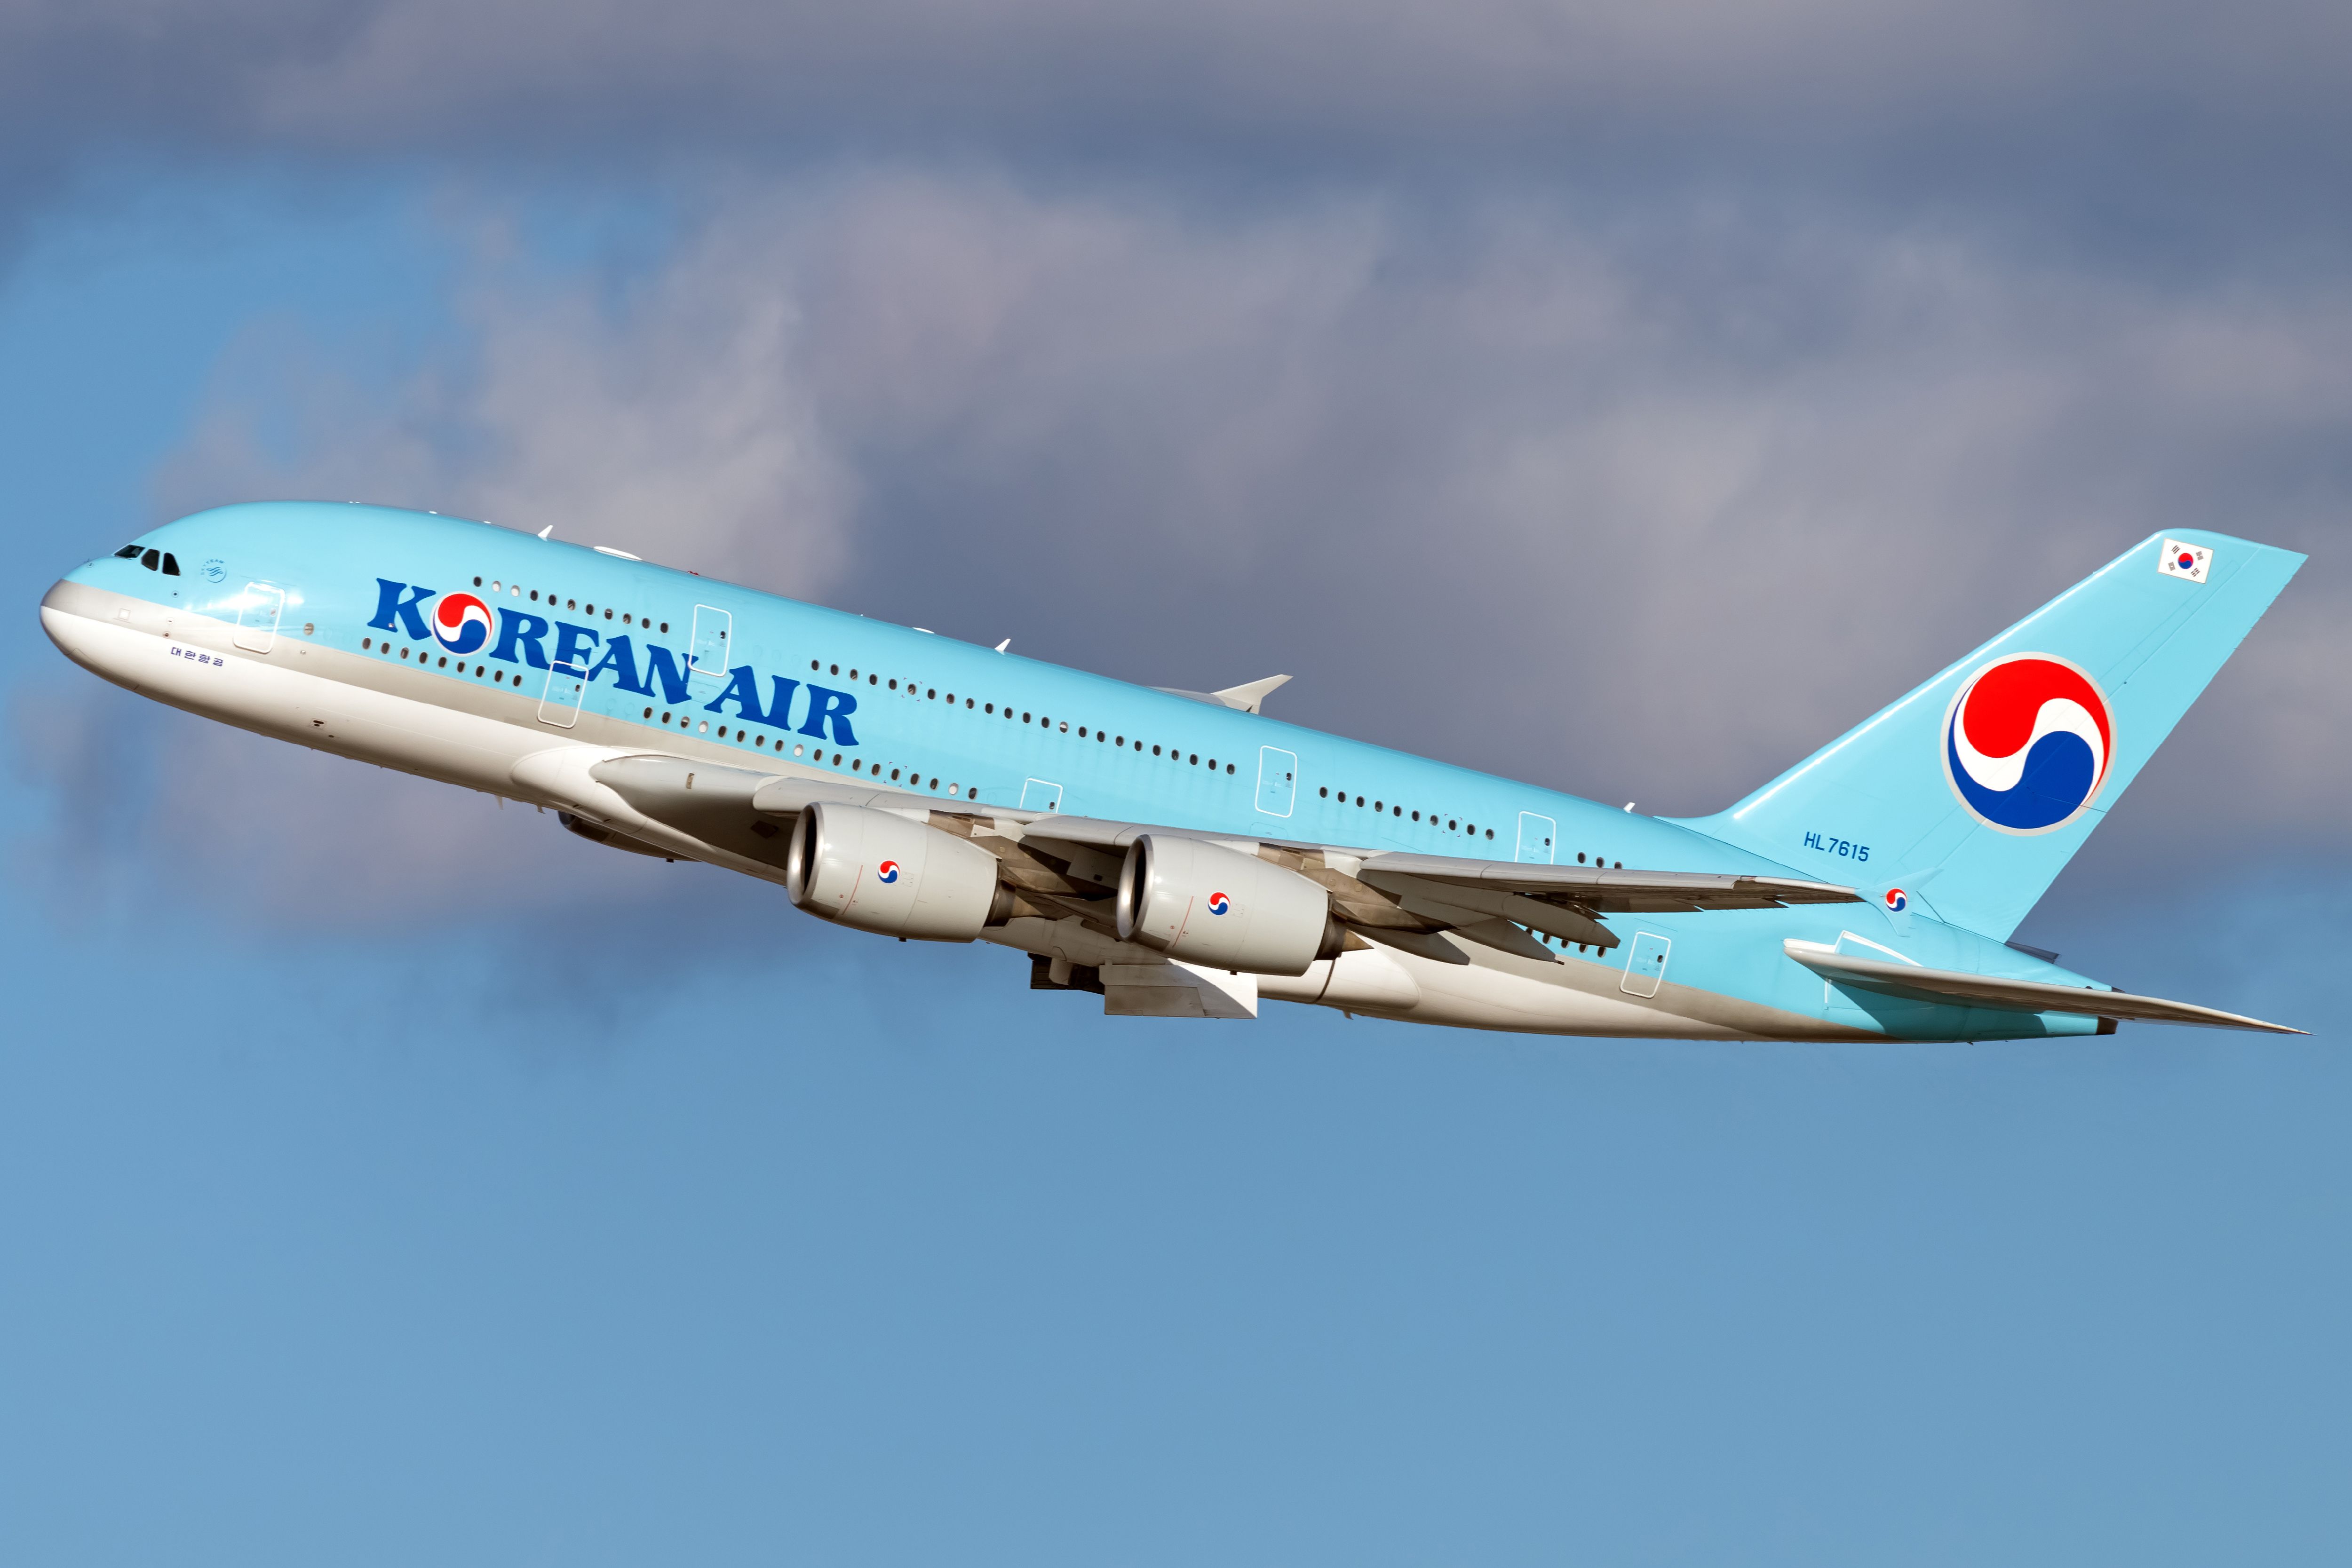 What Classes Of Travel Does Korean Air Offer?